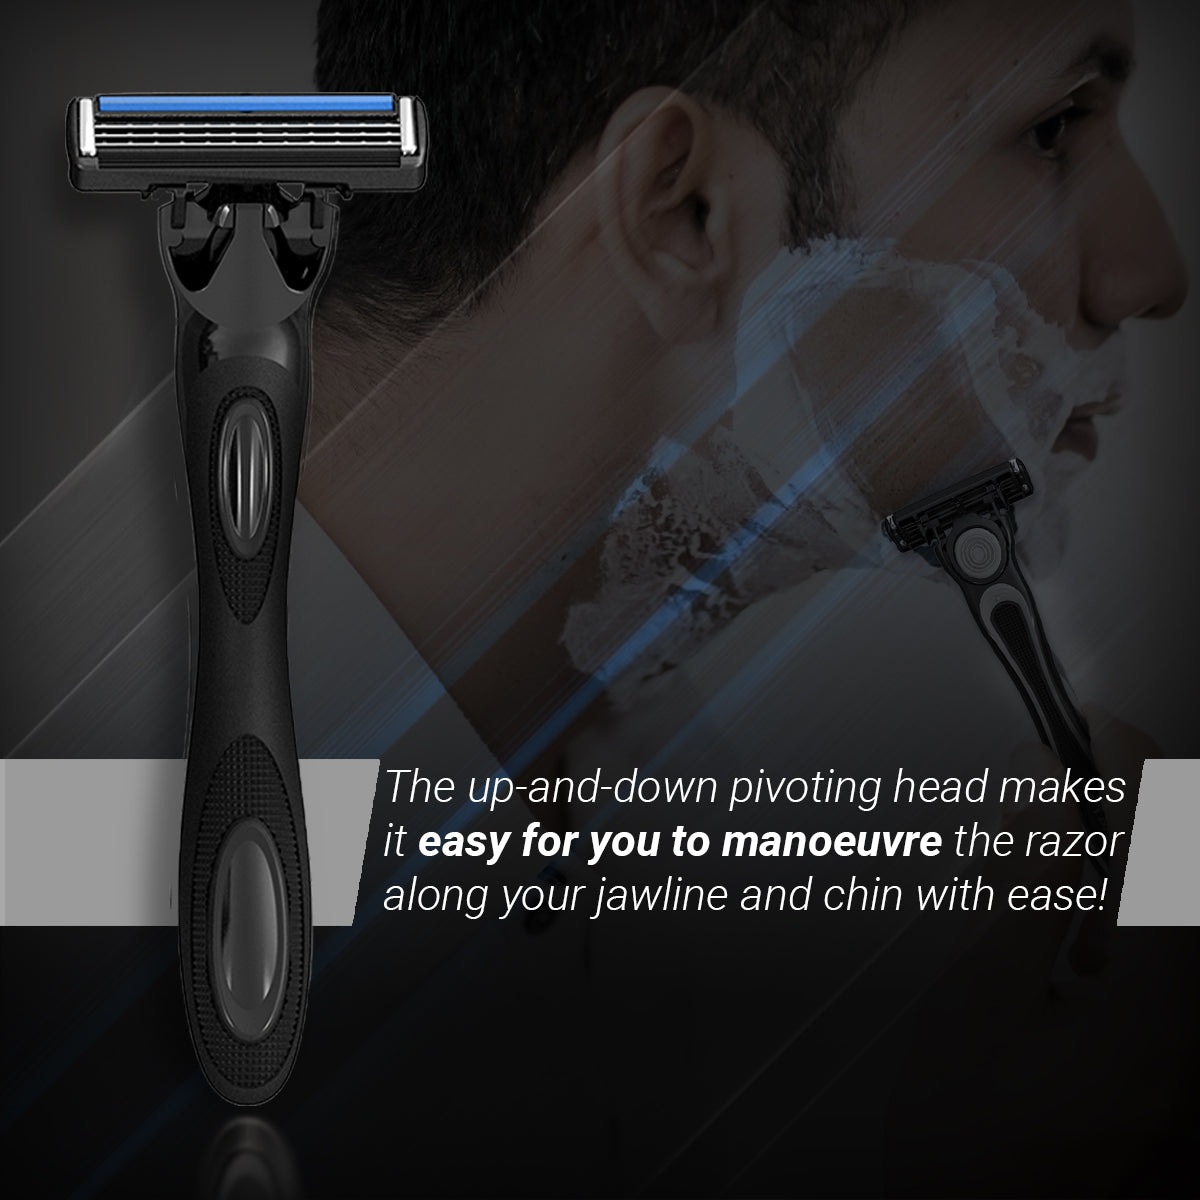 Zlade HyperGlide3 Razor for Men – Powered by Bic